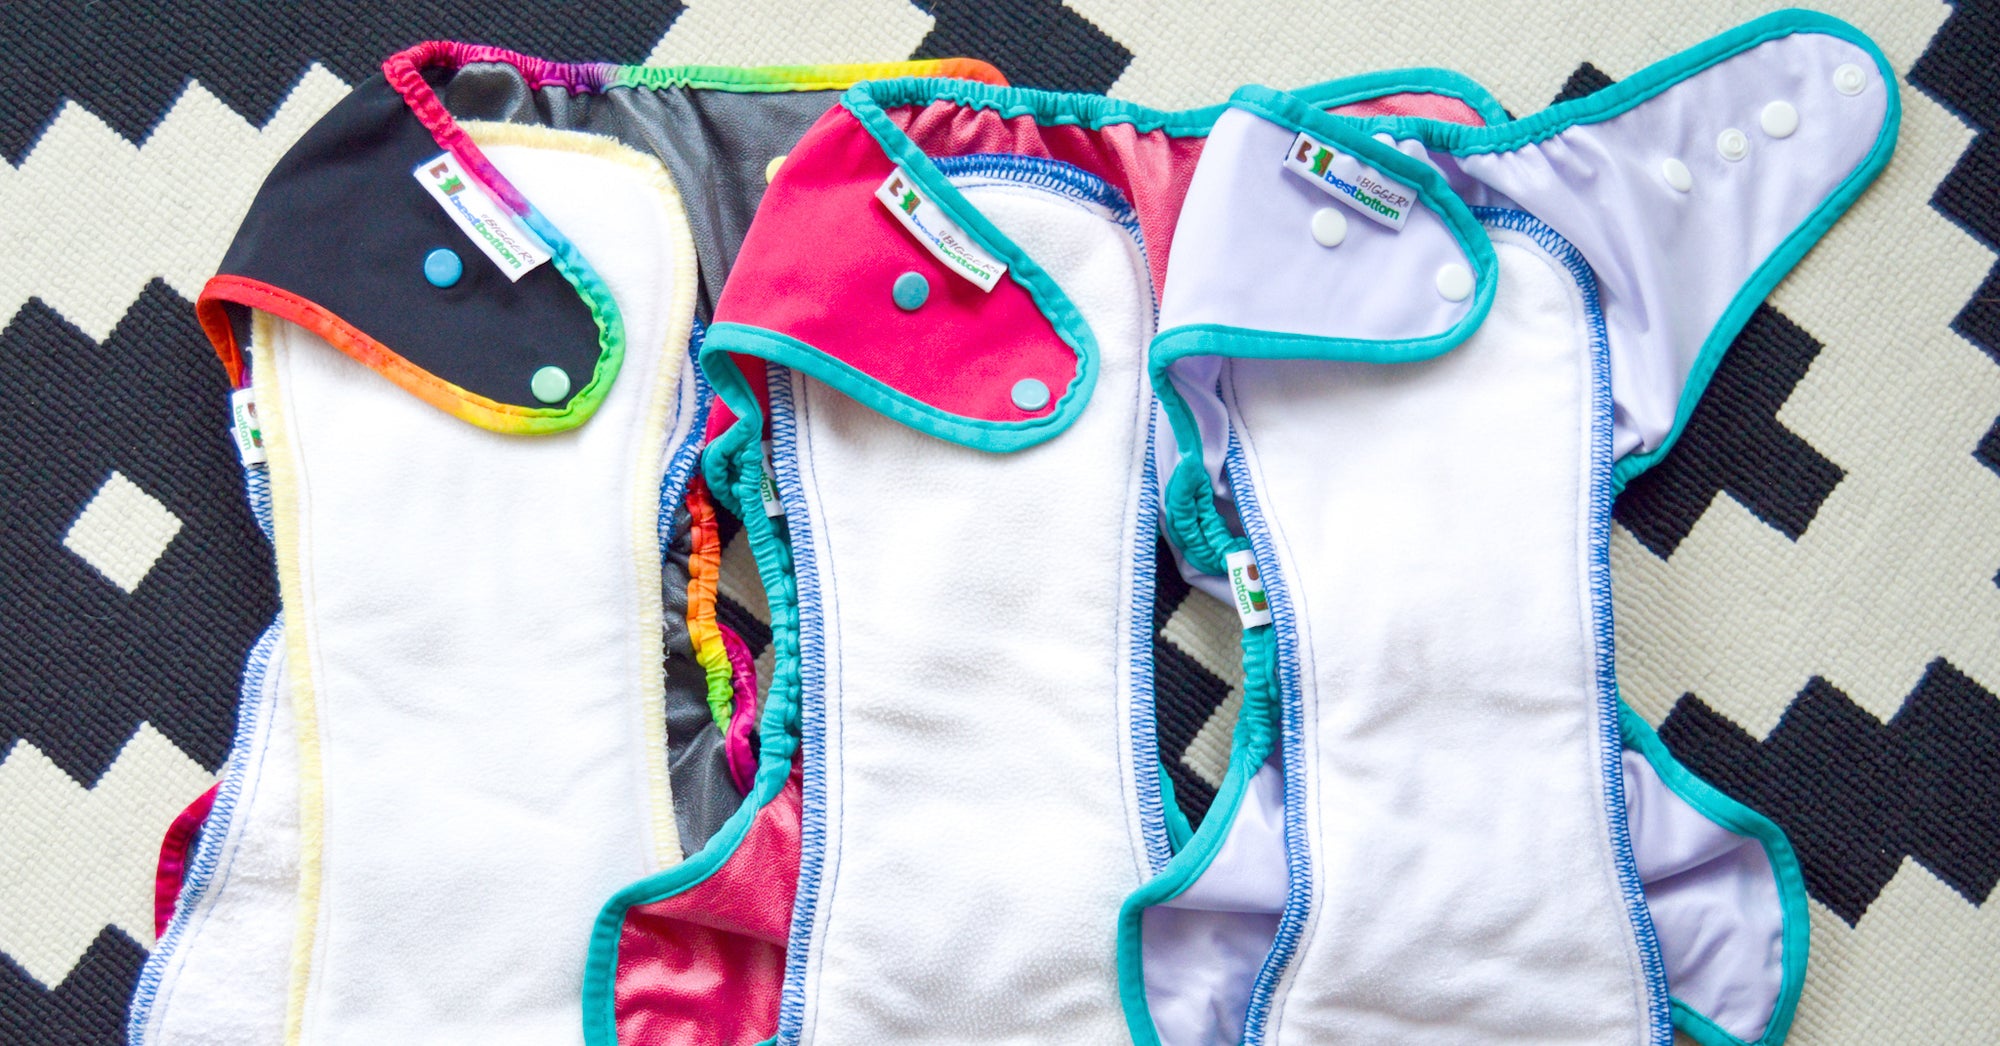 The Best Cloth Diaper Inserts for You: Let’s look at the Types of Cloth Diaper Inserts